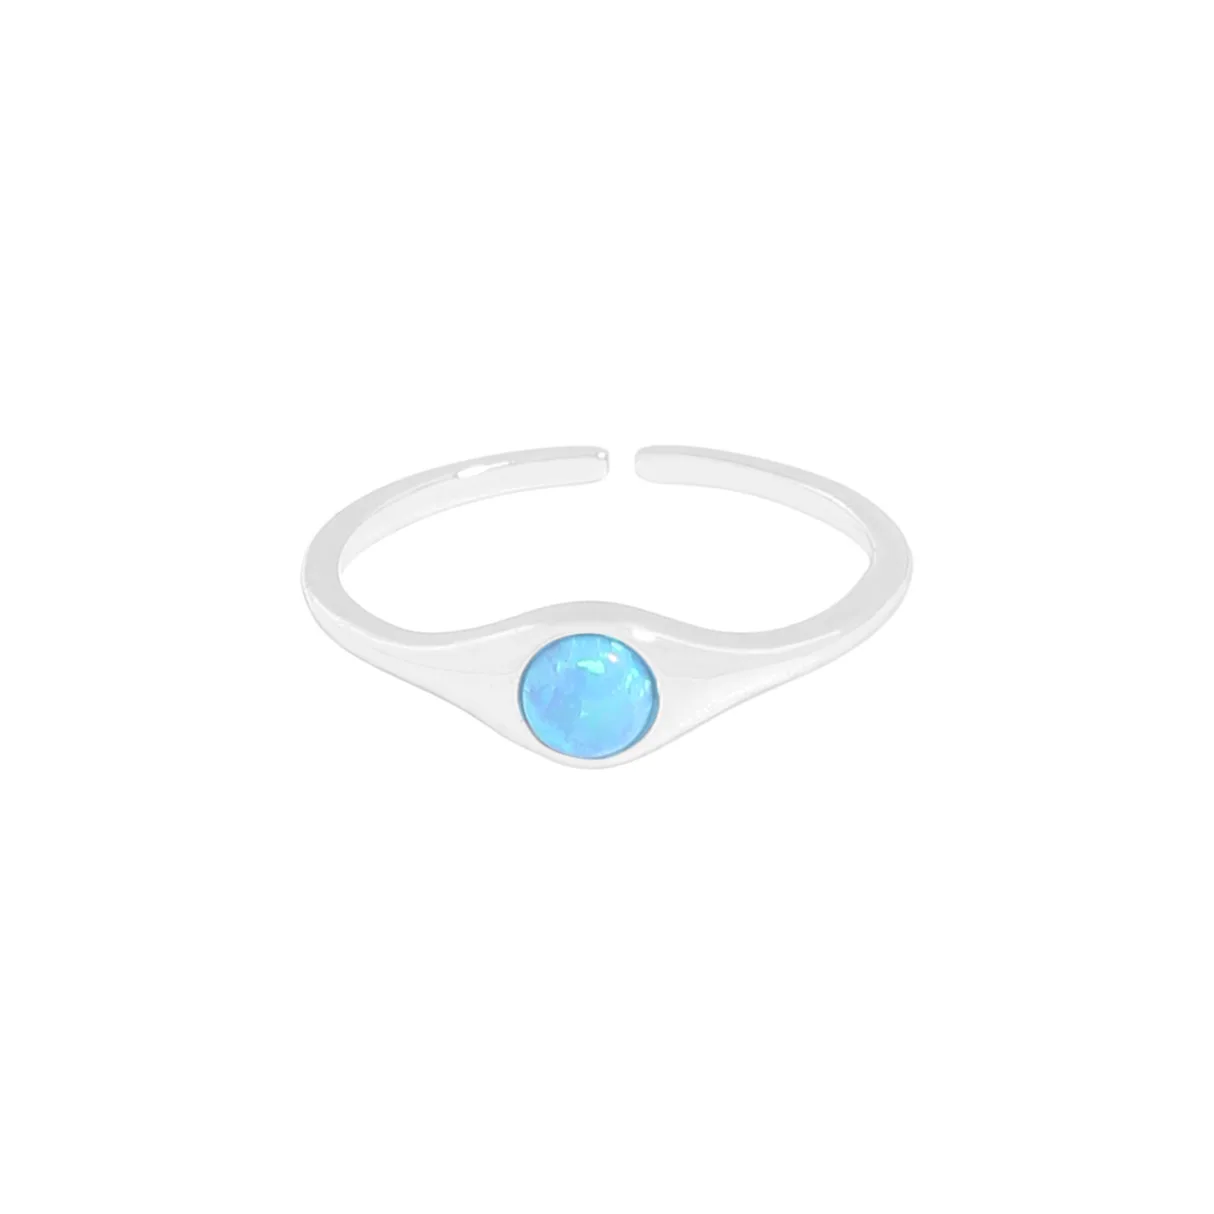 

VIANRLA 925 Sterling Silver Ring Colored Moonstone Bead Ring Minimalism Adjustable Ring For Women Jewelry Gifts Wholesale